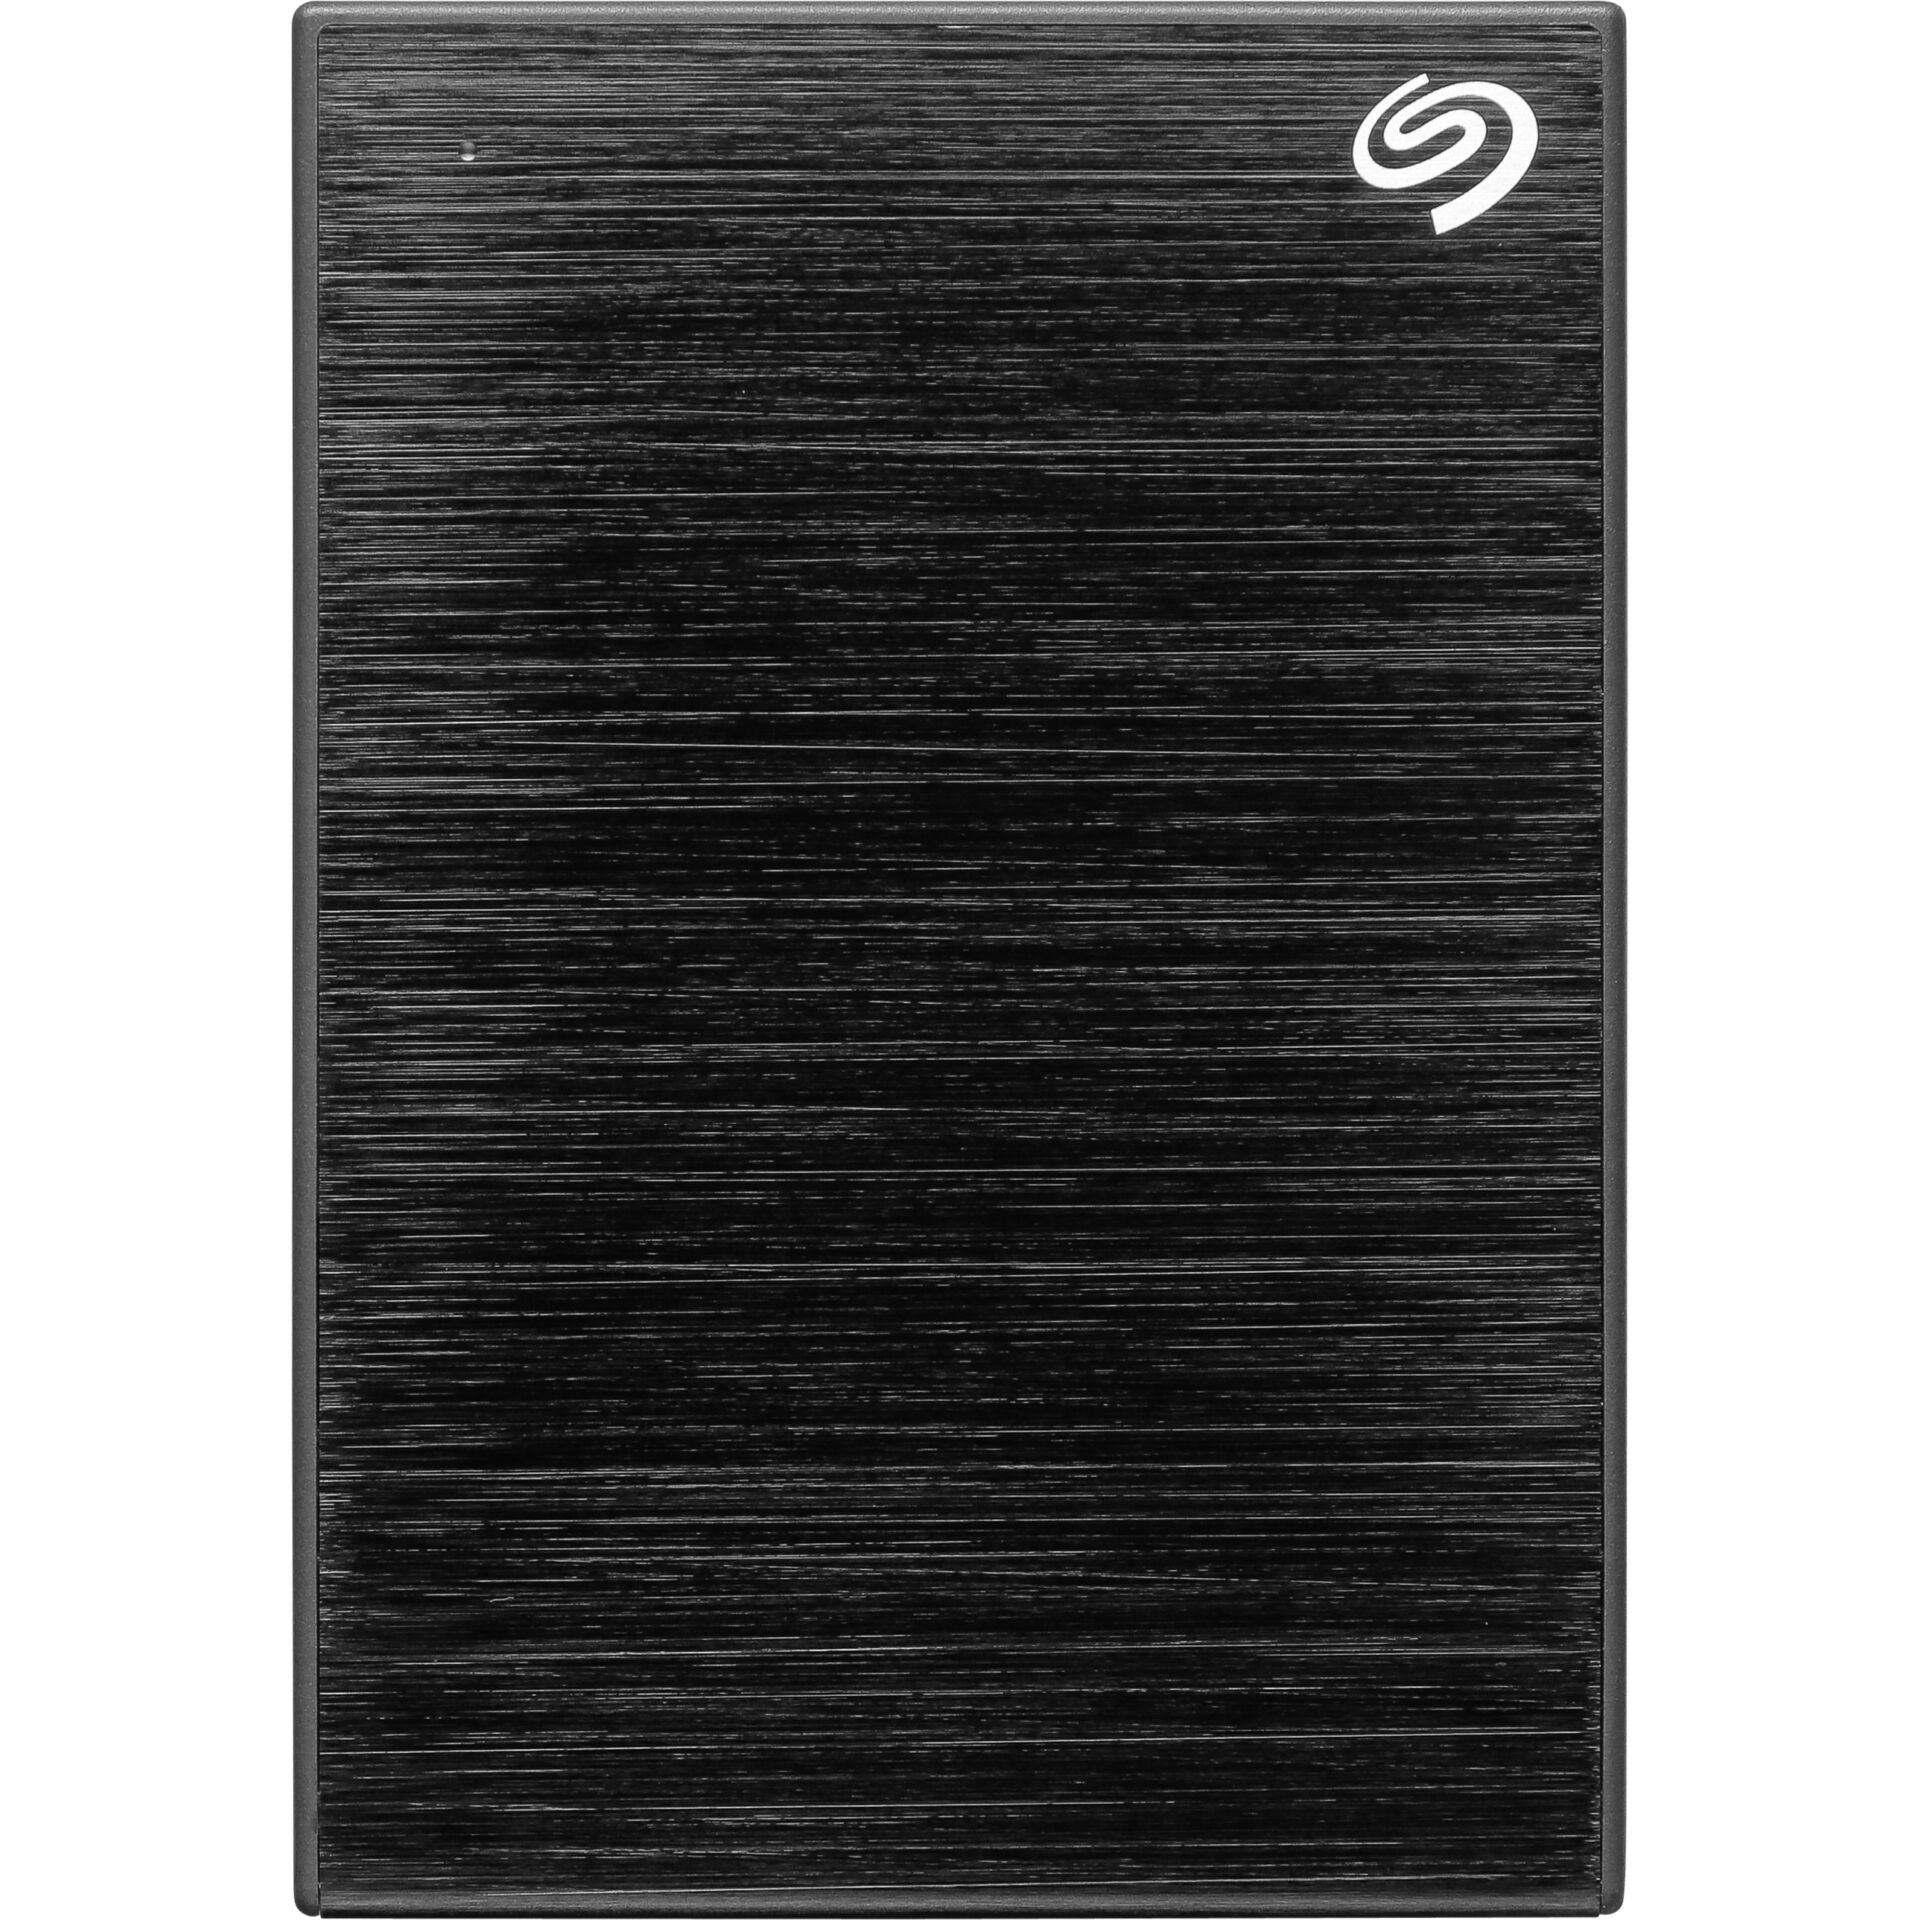 Portable OneTouch -Seagate 4 TB Seagate Hardware/Electronic Festplatte -Externe